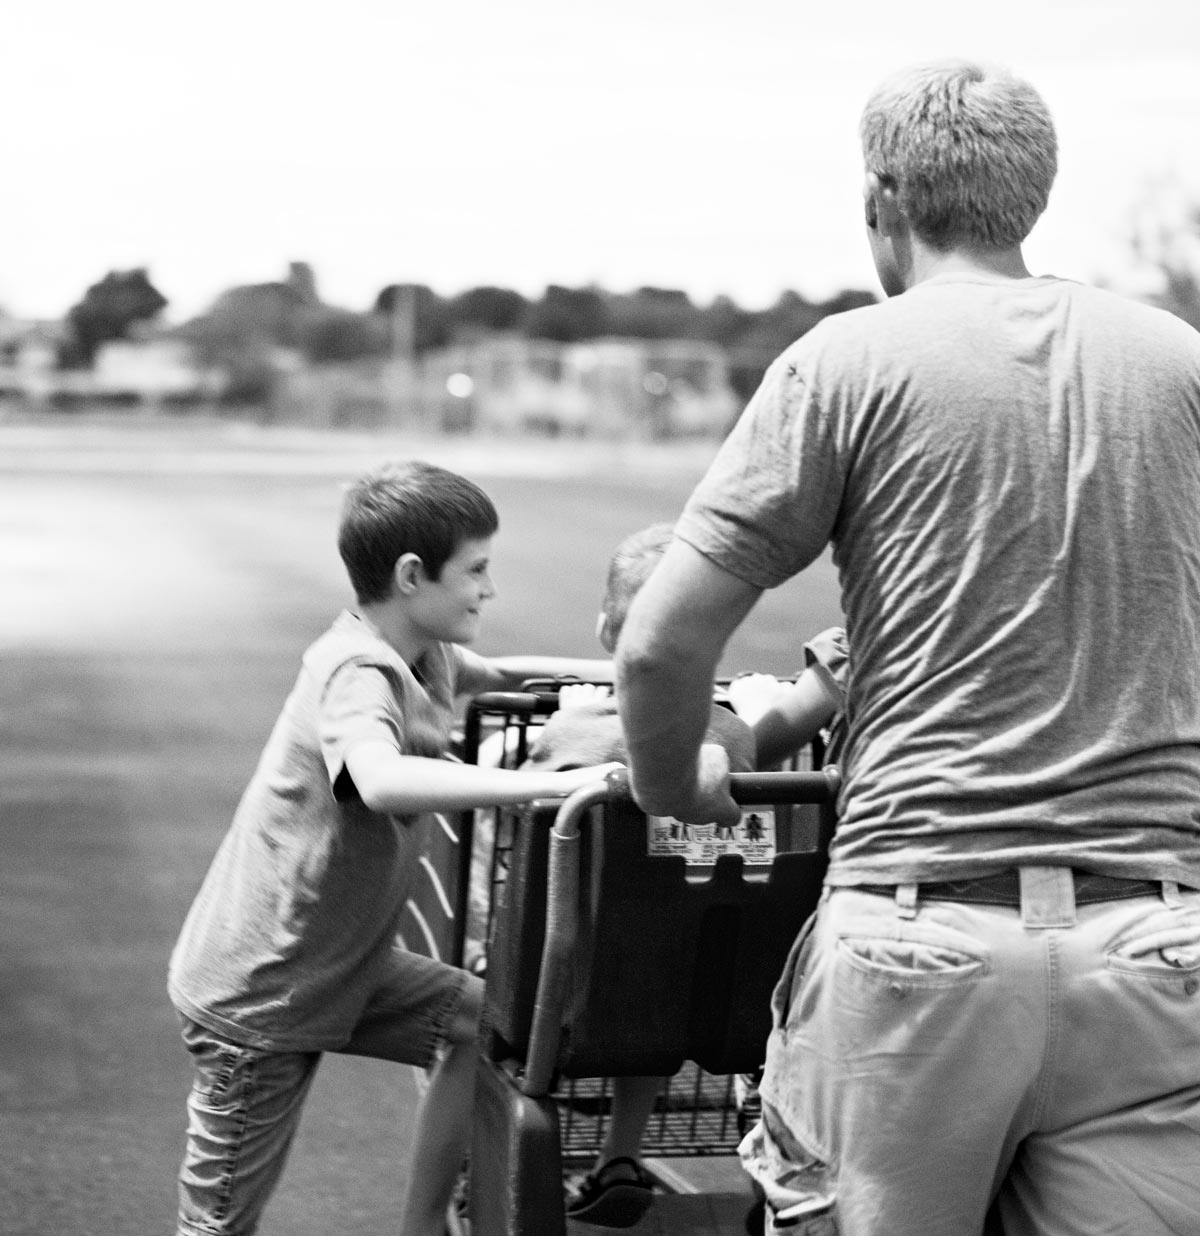 Black and white photo of a dad and son on a walk and pushing a cart with an infant in the baby seat